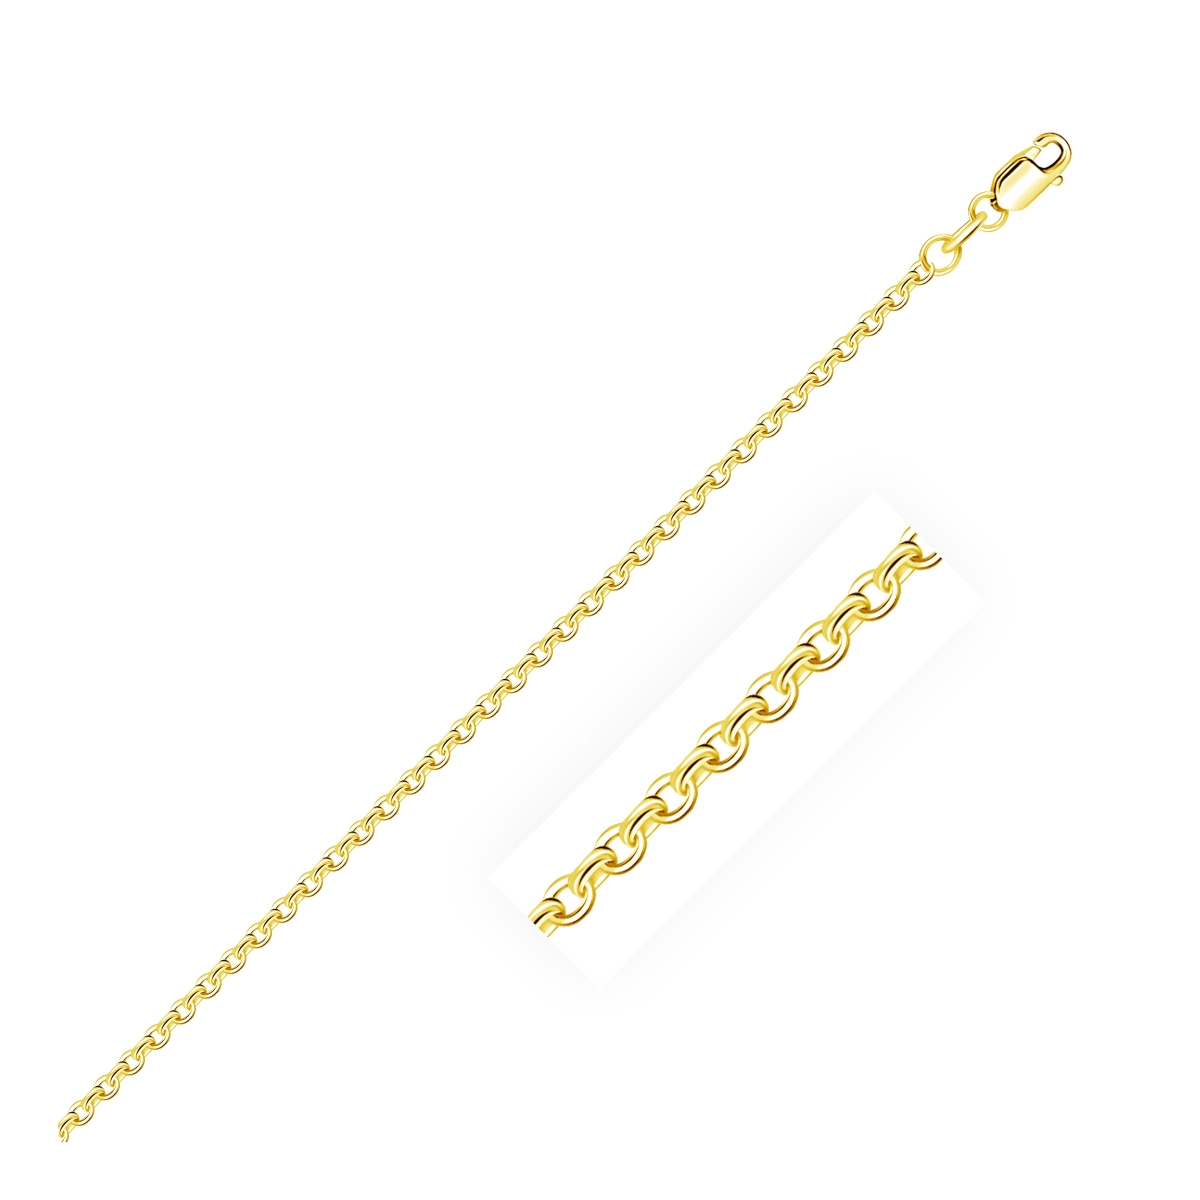 Picture of Iconic Jewels D117152-16 14k Yellow Gold Cable Link Chain, 1.8 mm - Size 16 in.